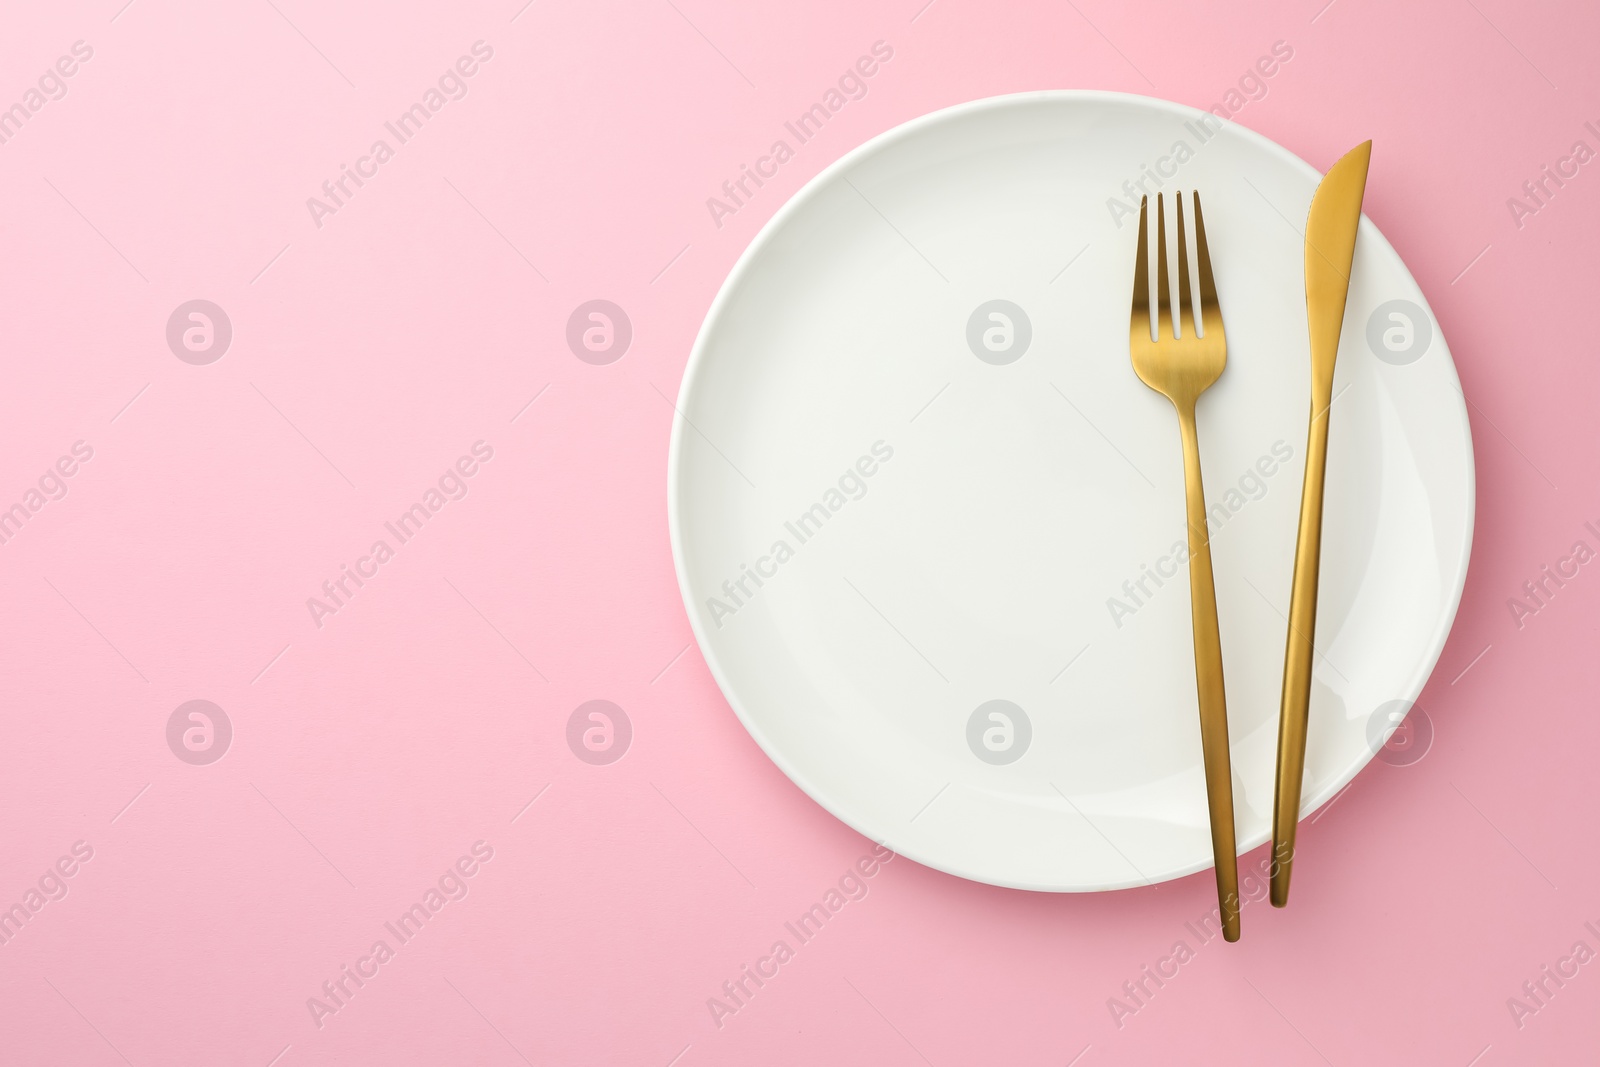 Photo of Plate, fork and knife on pink background, top view. Space for text